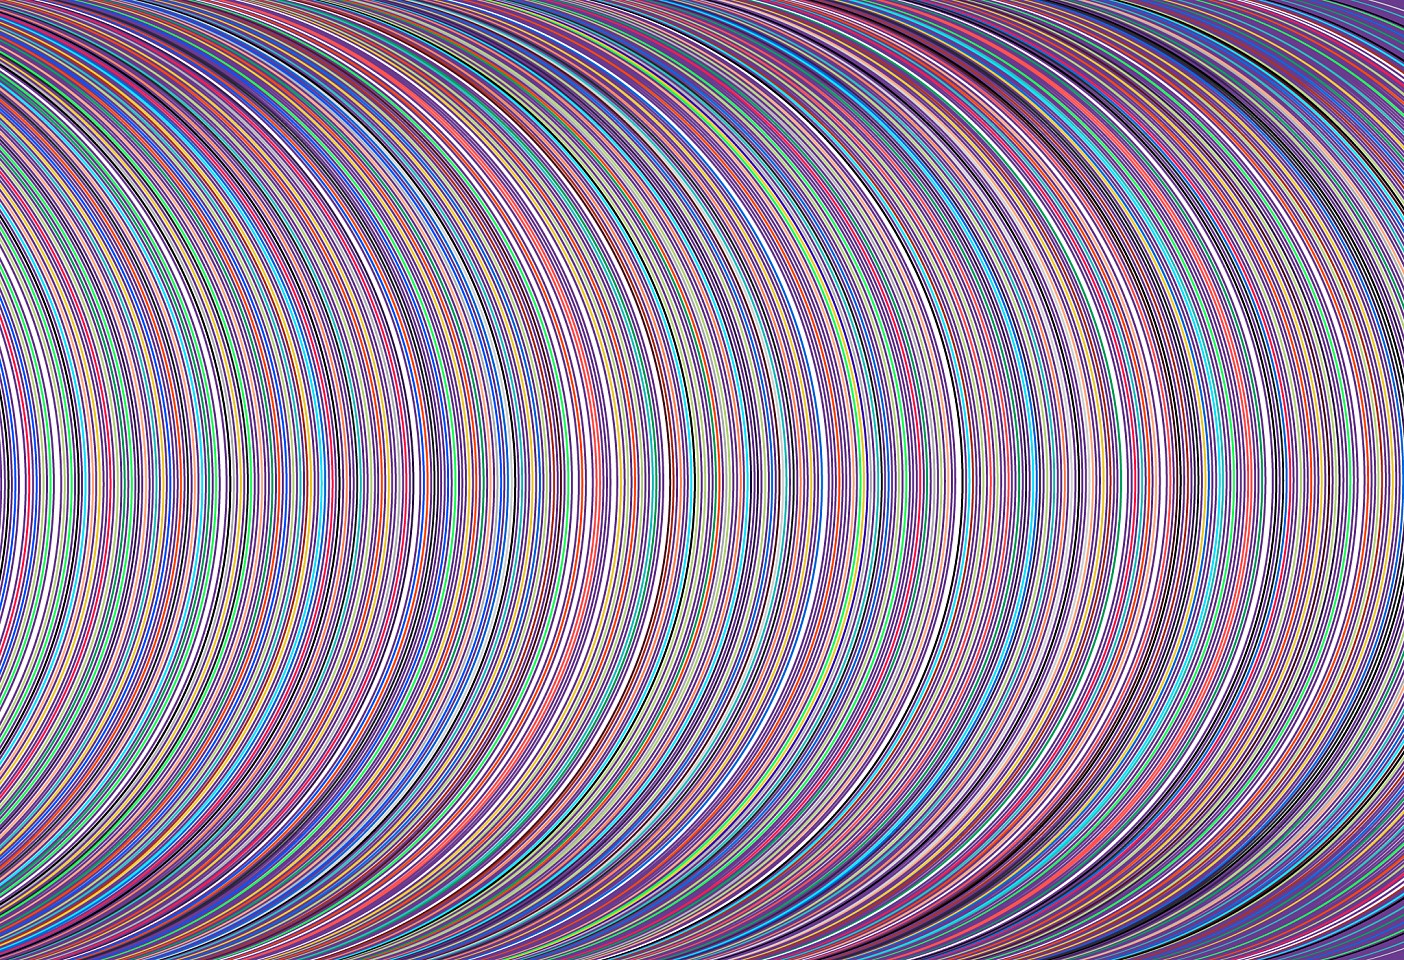 Dane Albert, Arcs #9, 2023
Acrylic on canvas (Concept), 48 x 72 in. (121.9 x 182.9 cm)
Series of colored lines and shapes in multiple configurations
DA.2023.arcs-009